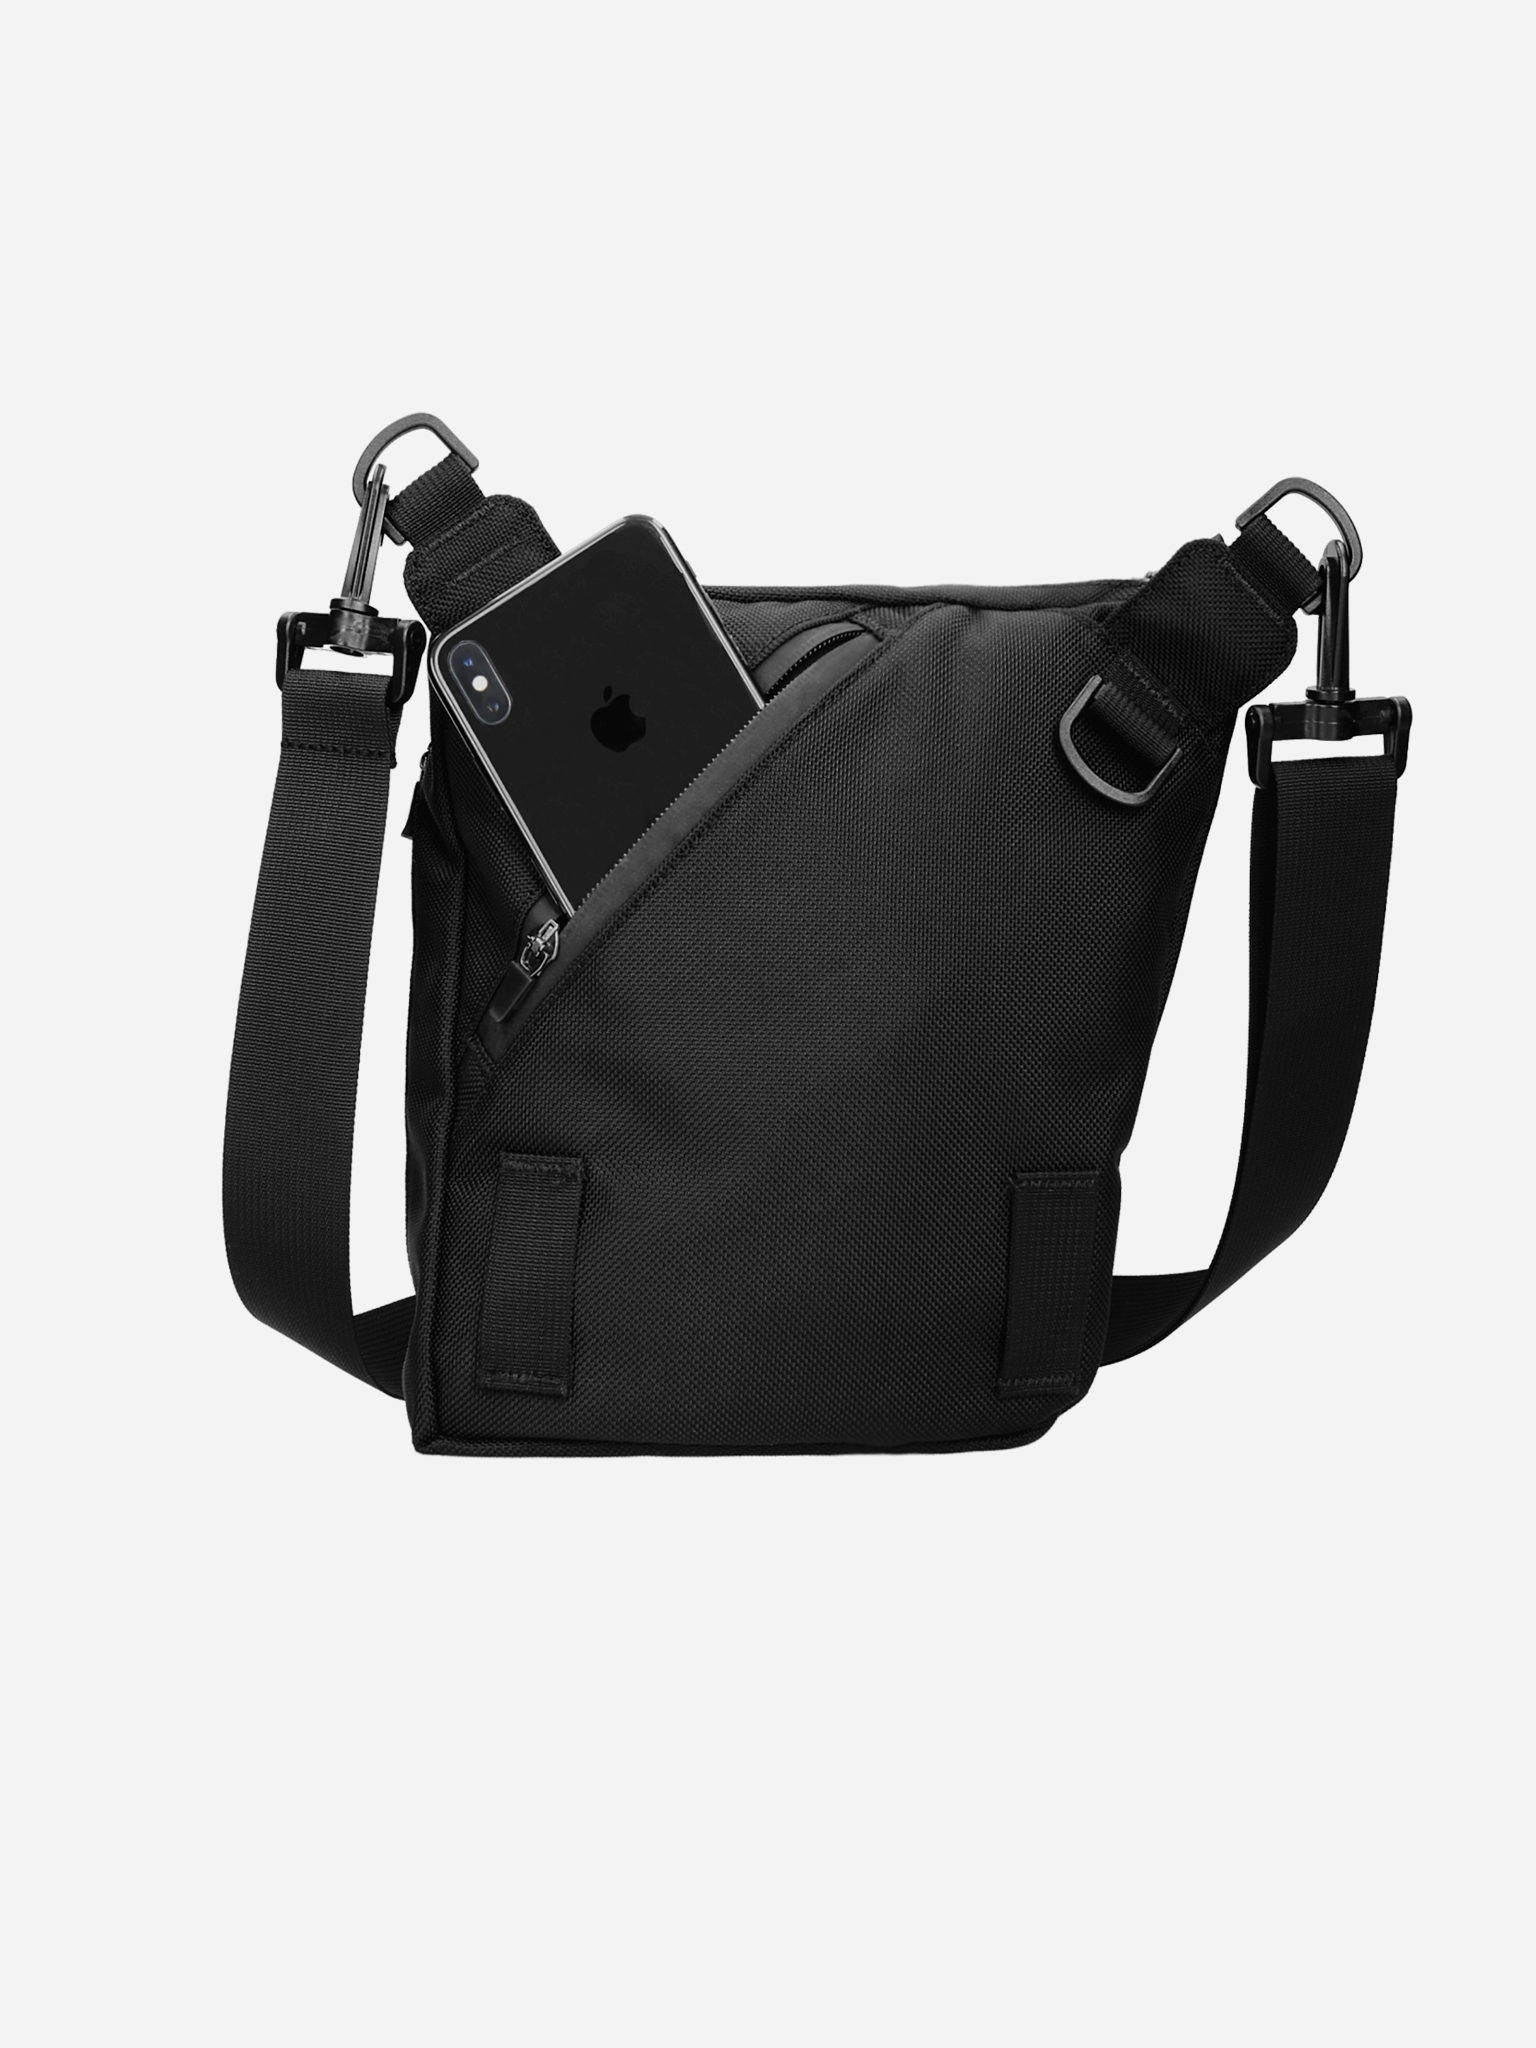 bolstr Small Carry 3.0 Product